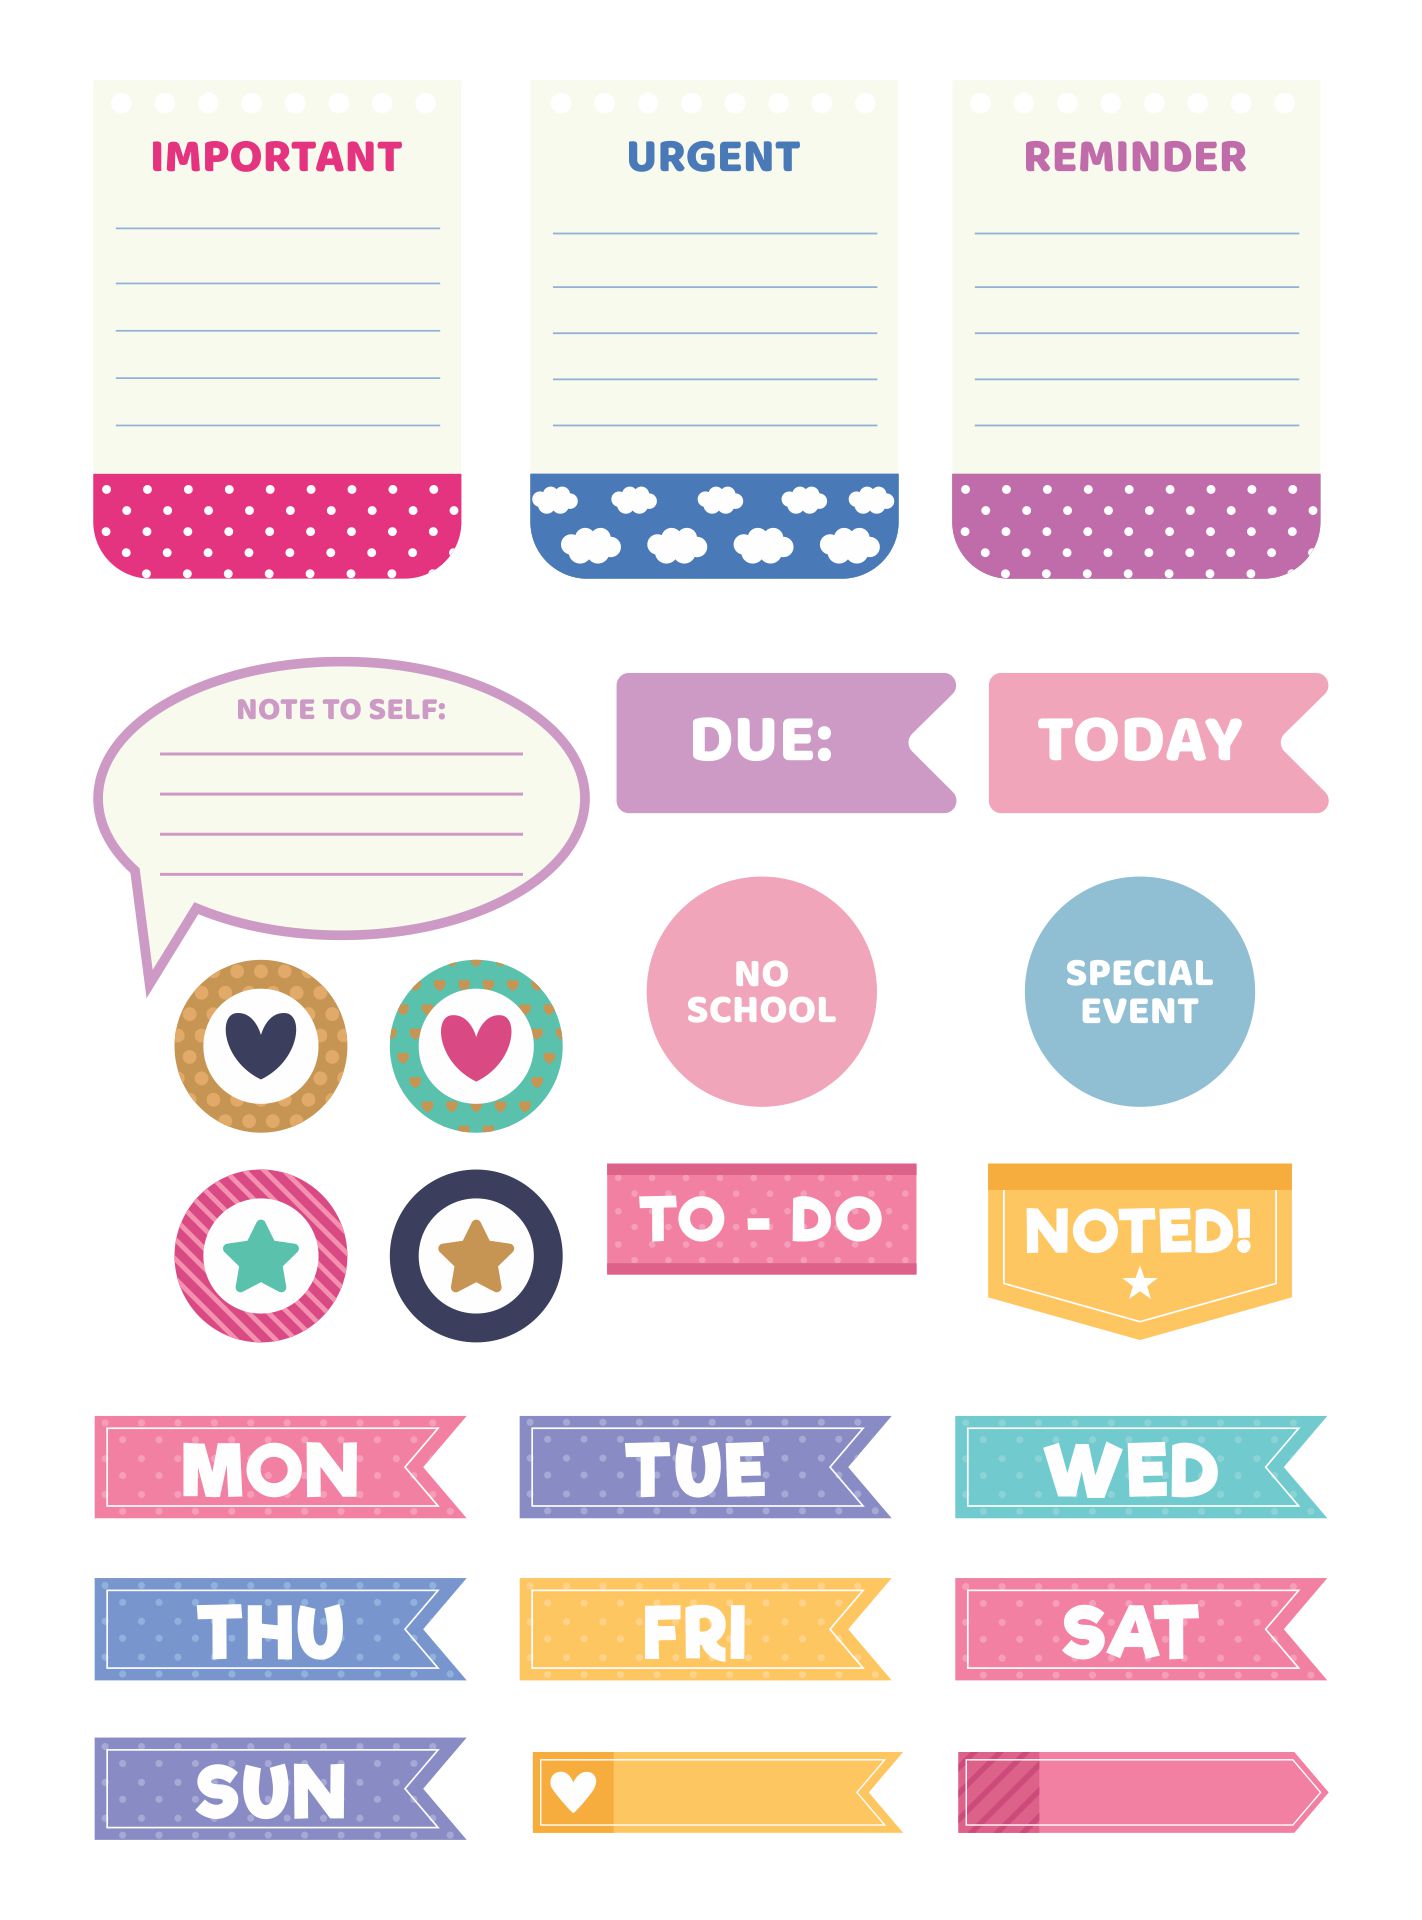 4 Best Images of Free Printable Calendar Reminder Stickers Free